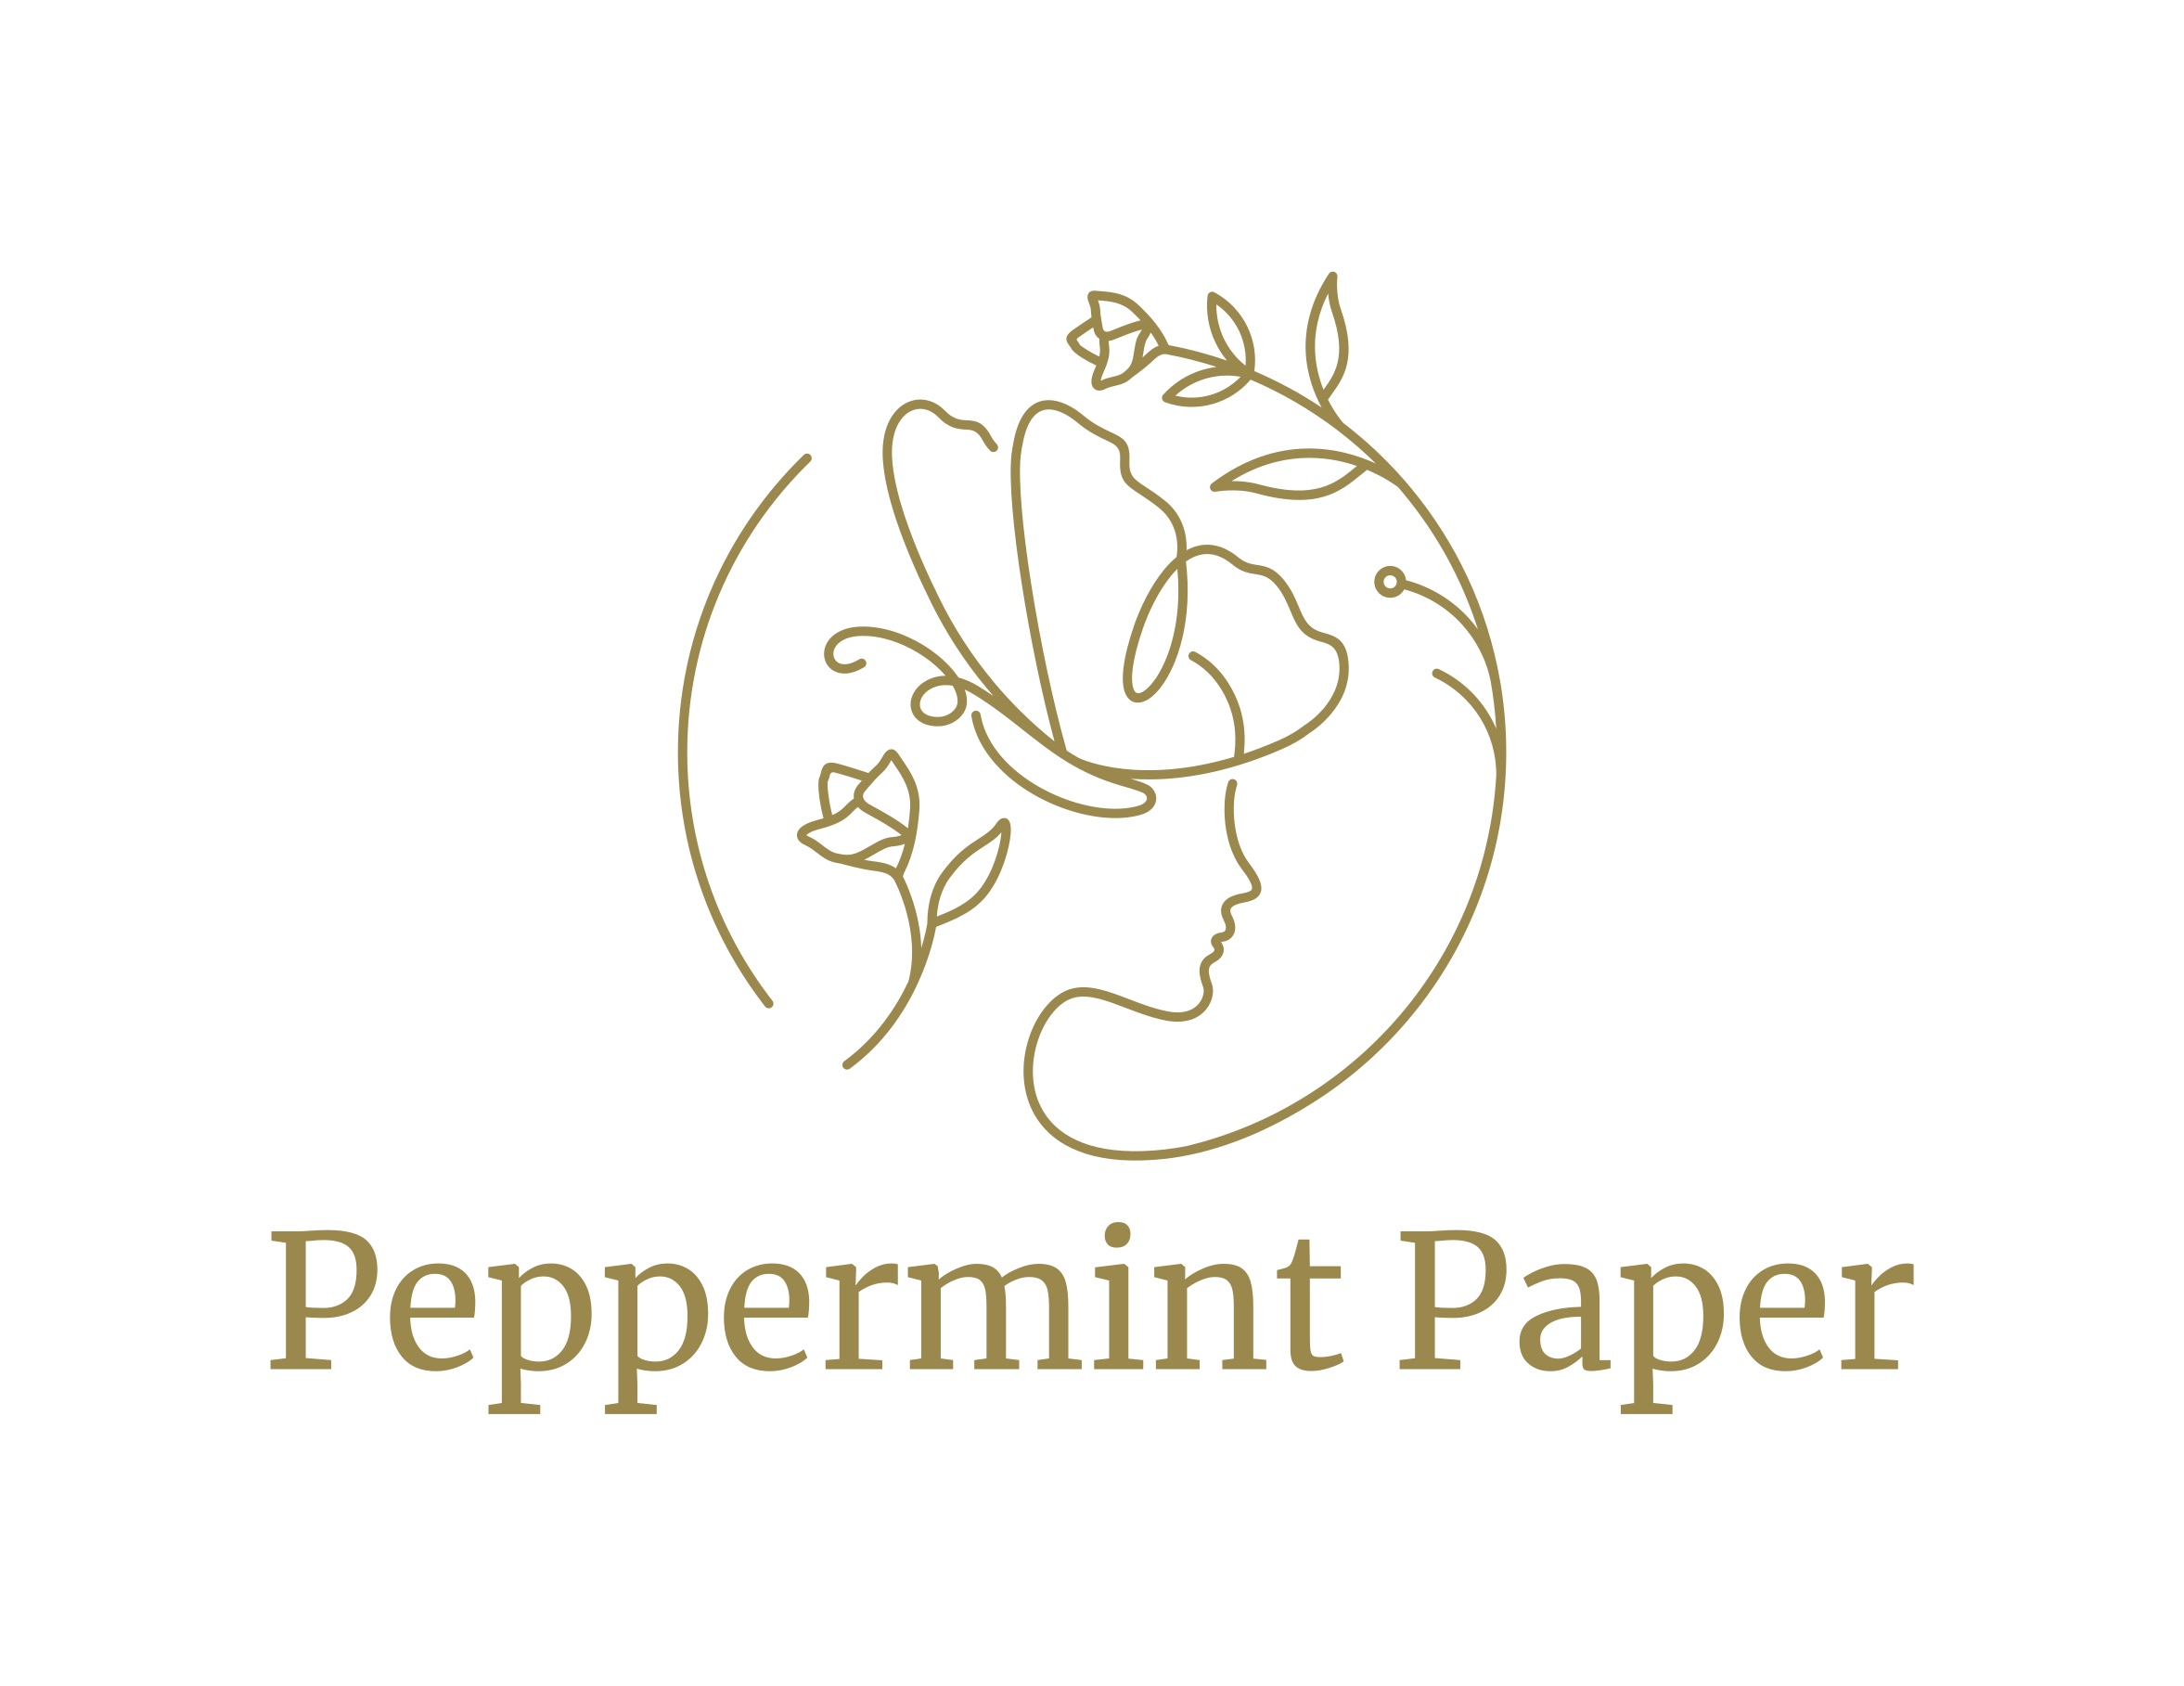 Peppermint Paper